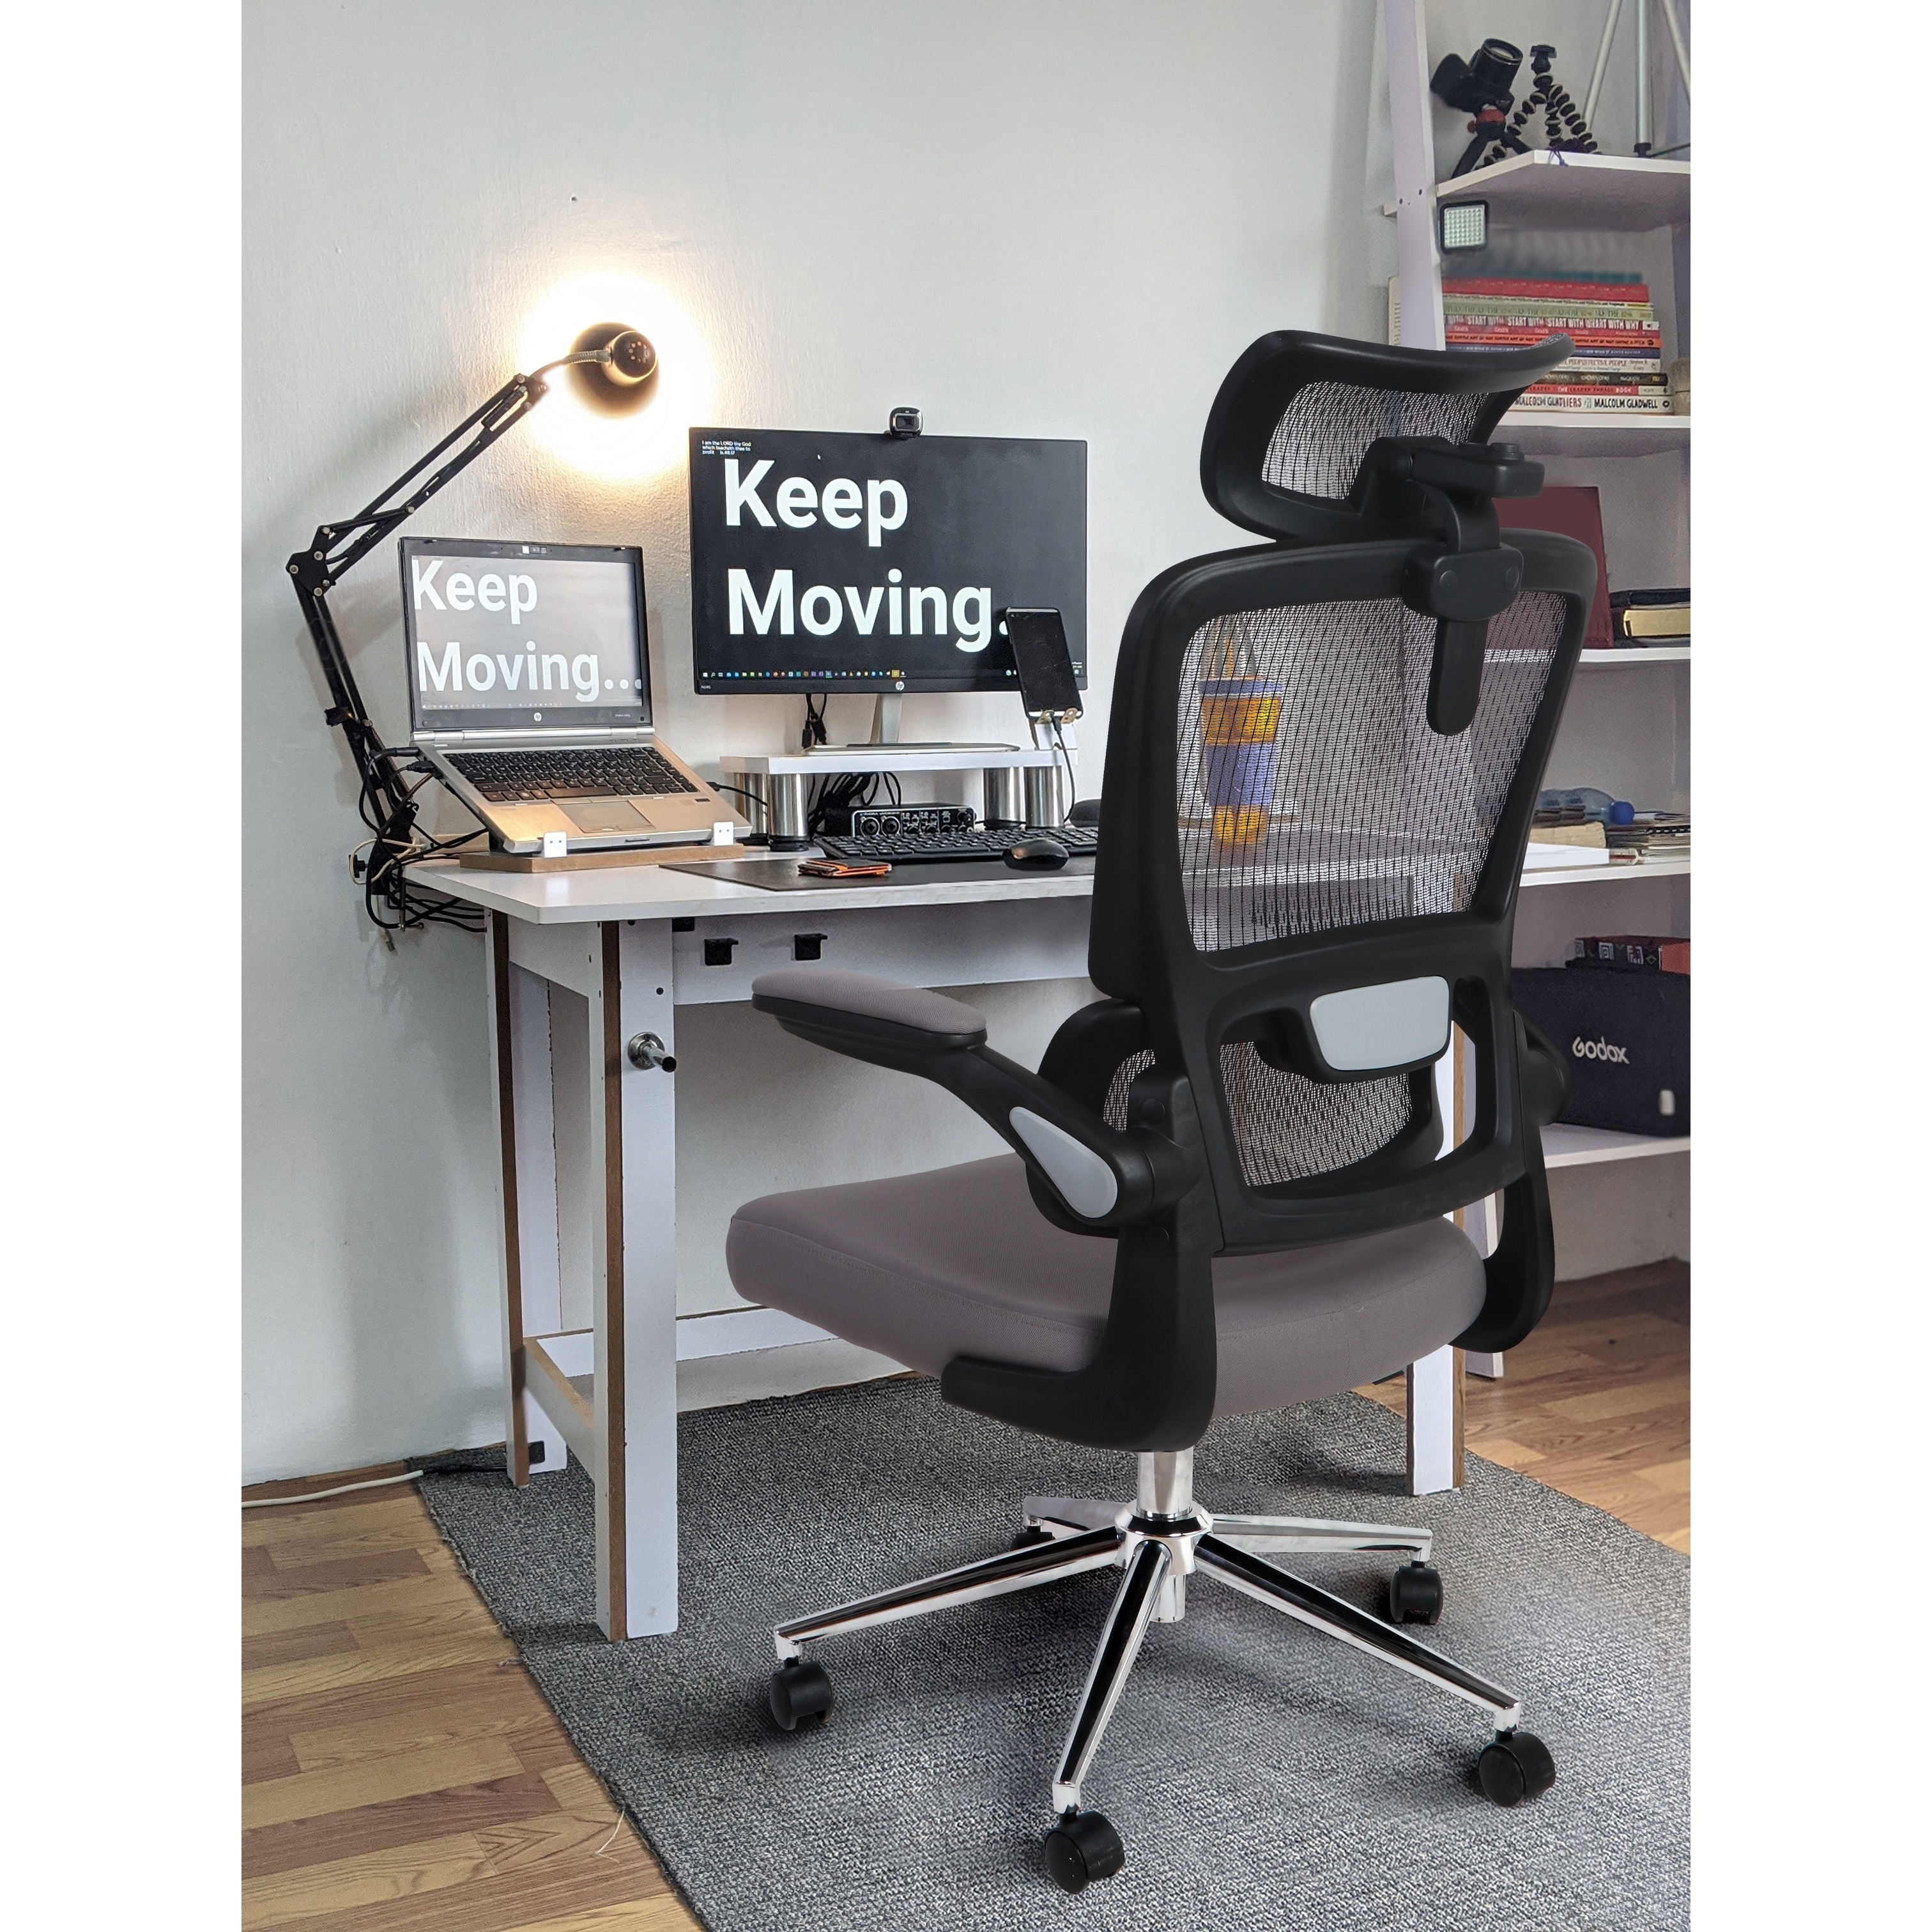 https://ak1.ostkcdn.com/images/products/is/images/direct/ca1ad70ead09416aab845d14b9c65b0967734e5c/Mesh-Ergonomic-Office-Chair-with-Flip-Up-Arms%2C-Adjustable-Headrest%2C-Tilt-Function%2C-Swivel-Computer-Chair.jpg